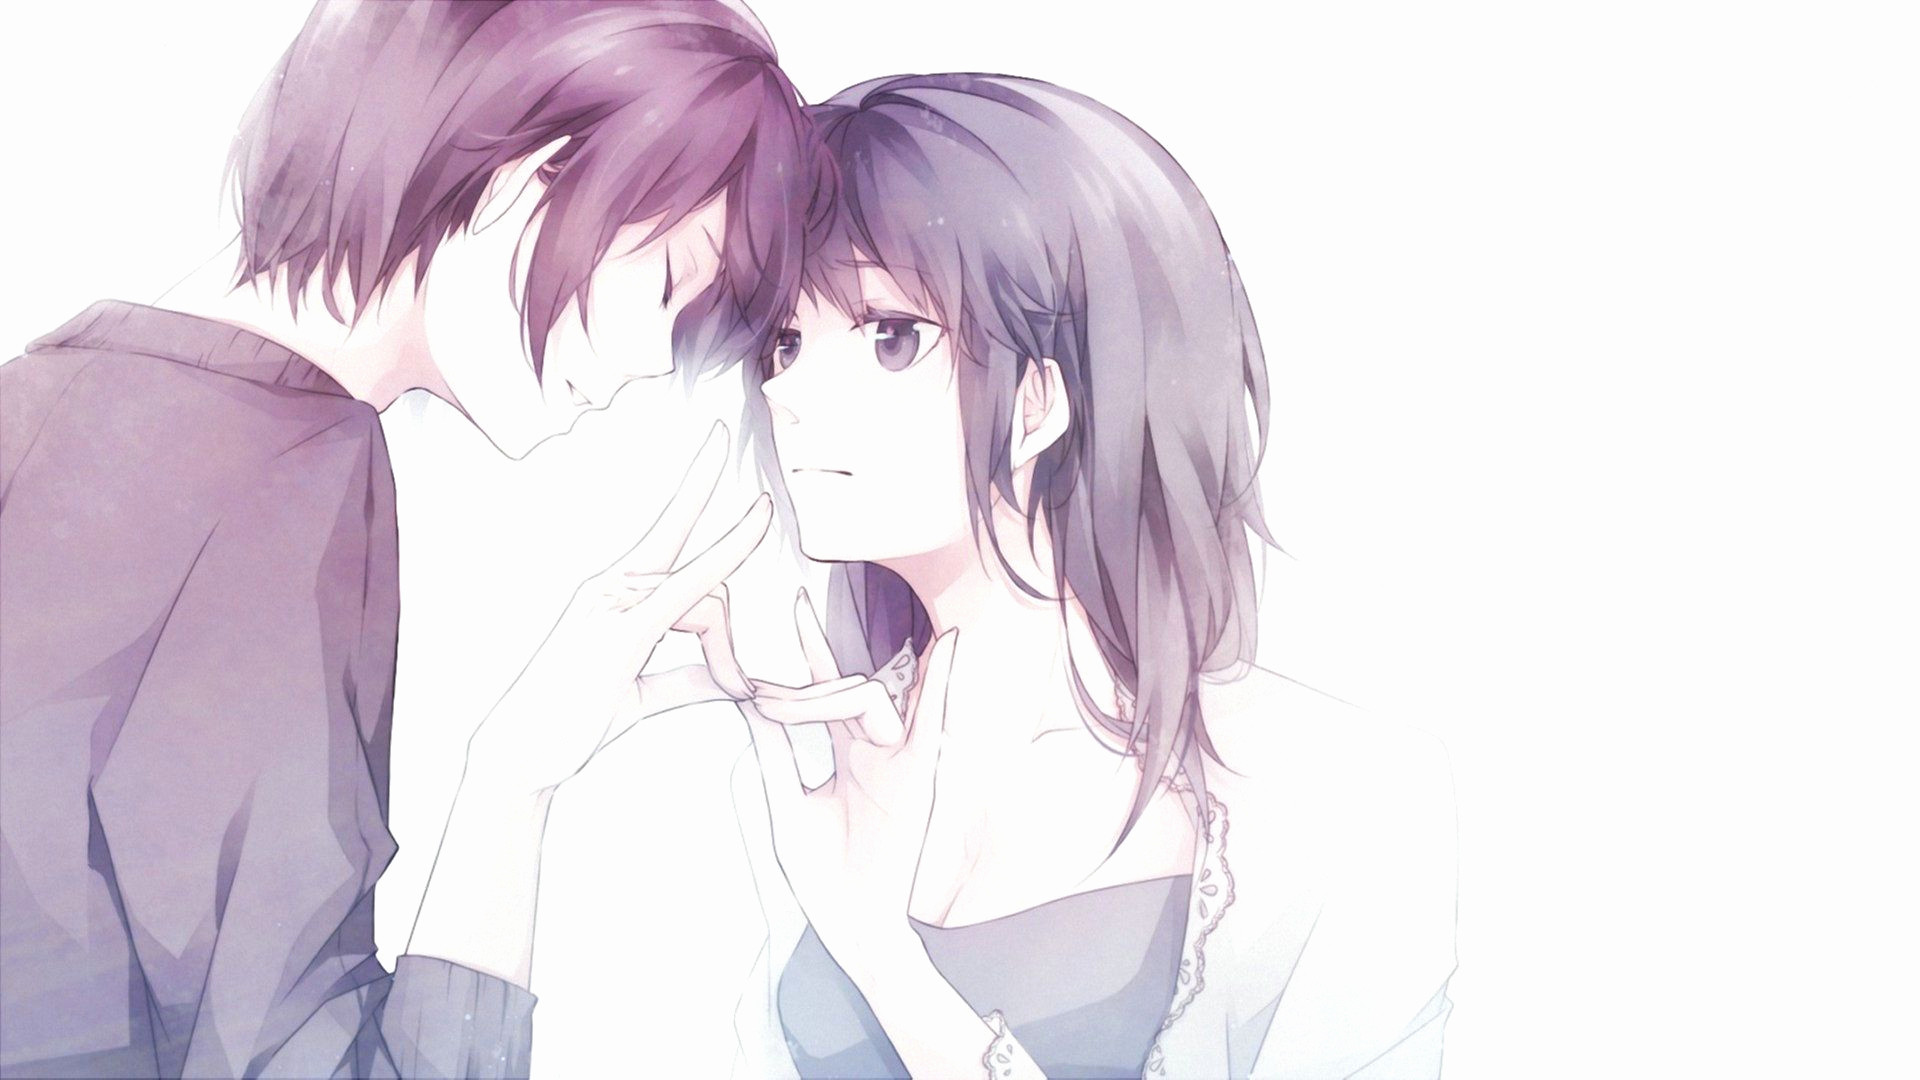 Cute Couple - Anime Wallpaper Download | MobCup